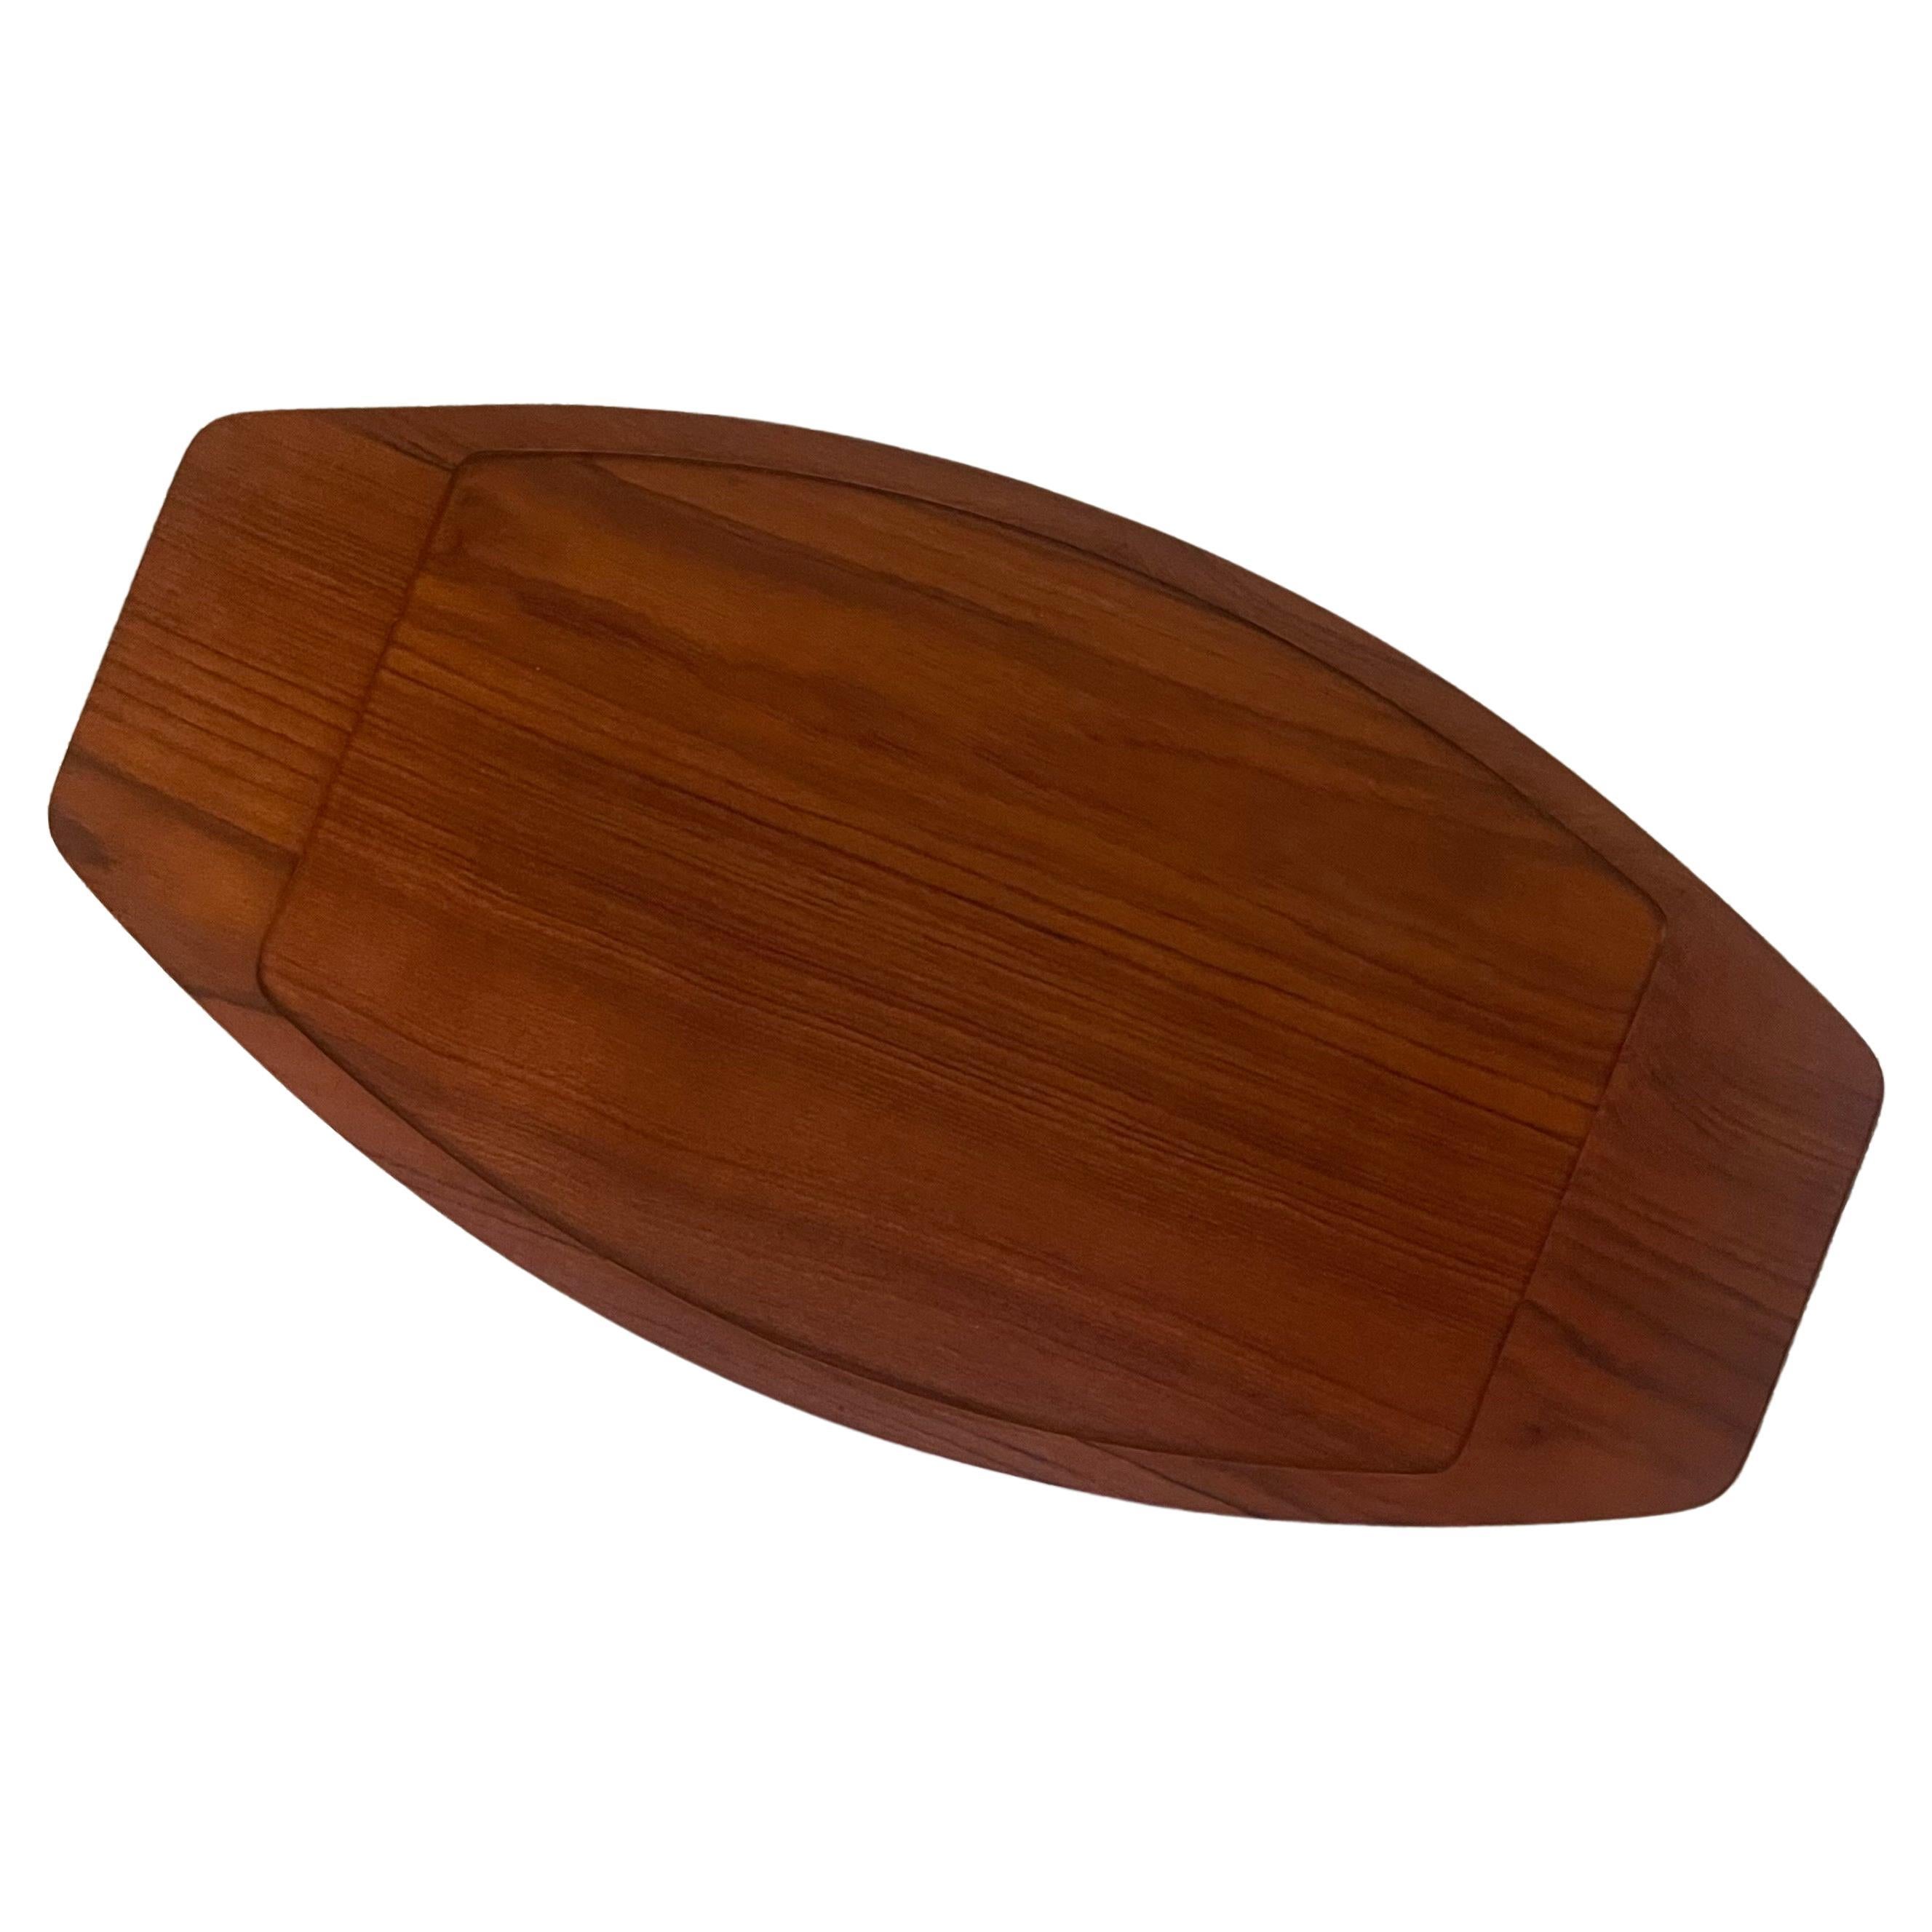 Beautiful large solid teak surfboard tray with raised edge by Digsmed, circa 1950s.  The piece is in good vintage condition and measures 22.5